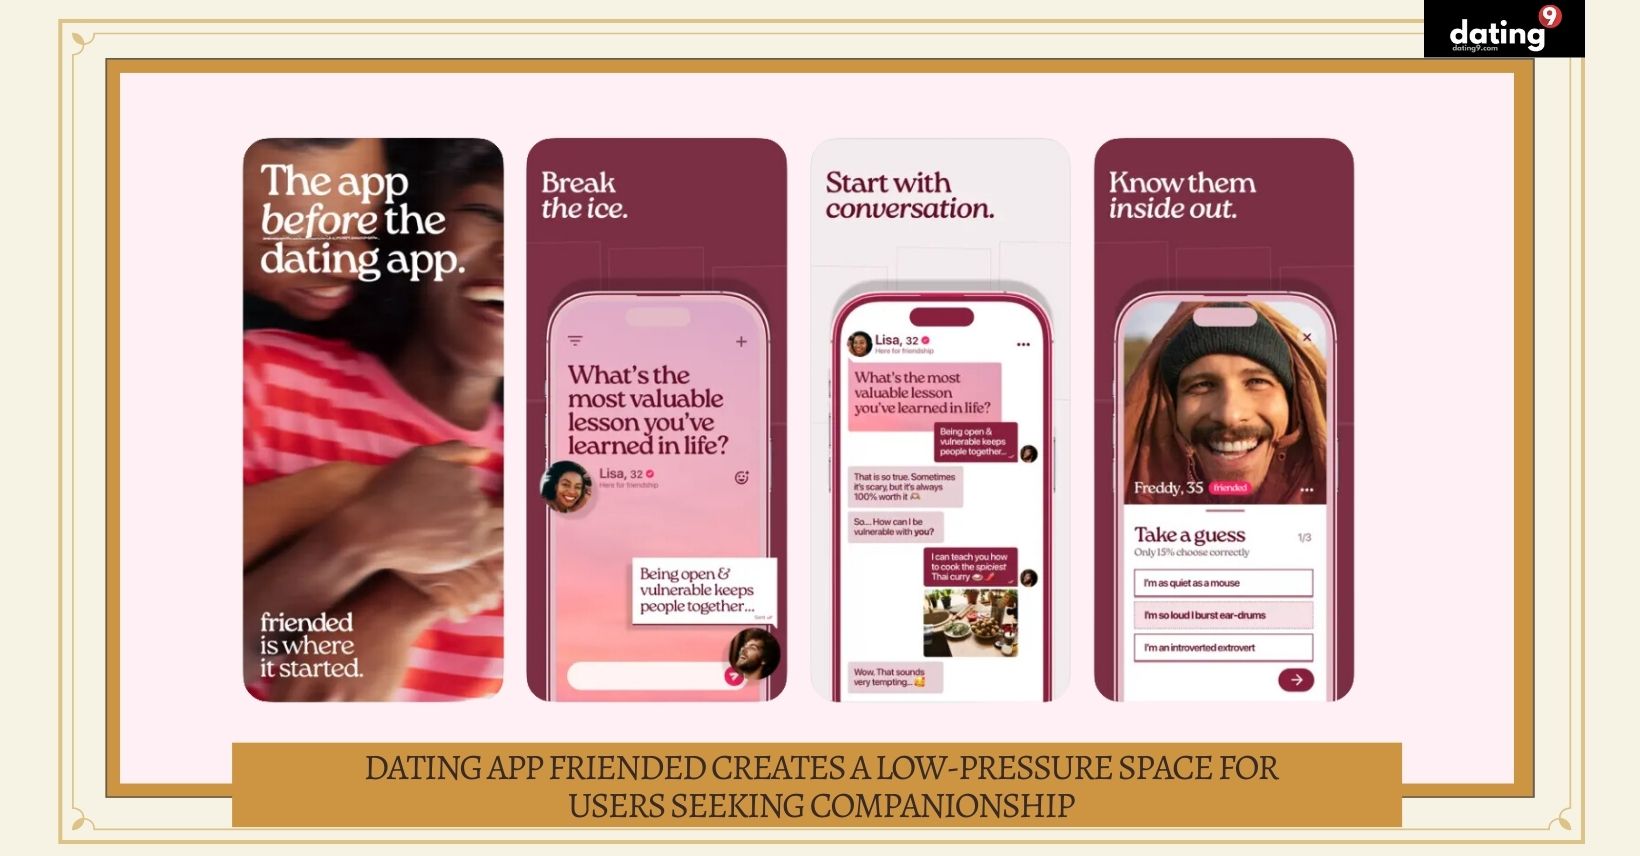 Dating App Friended Creates a Low-Pressure Space for Users Seeking Companionship